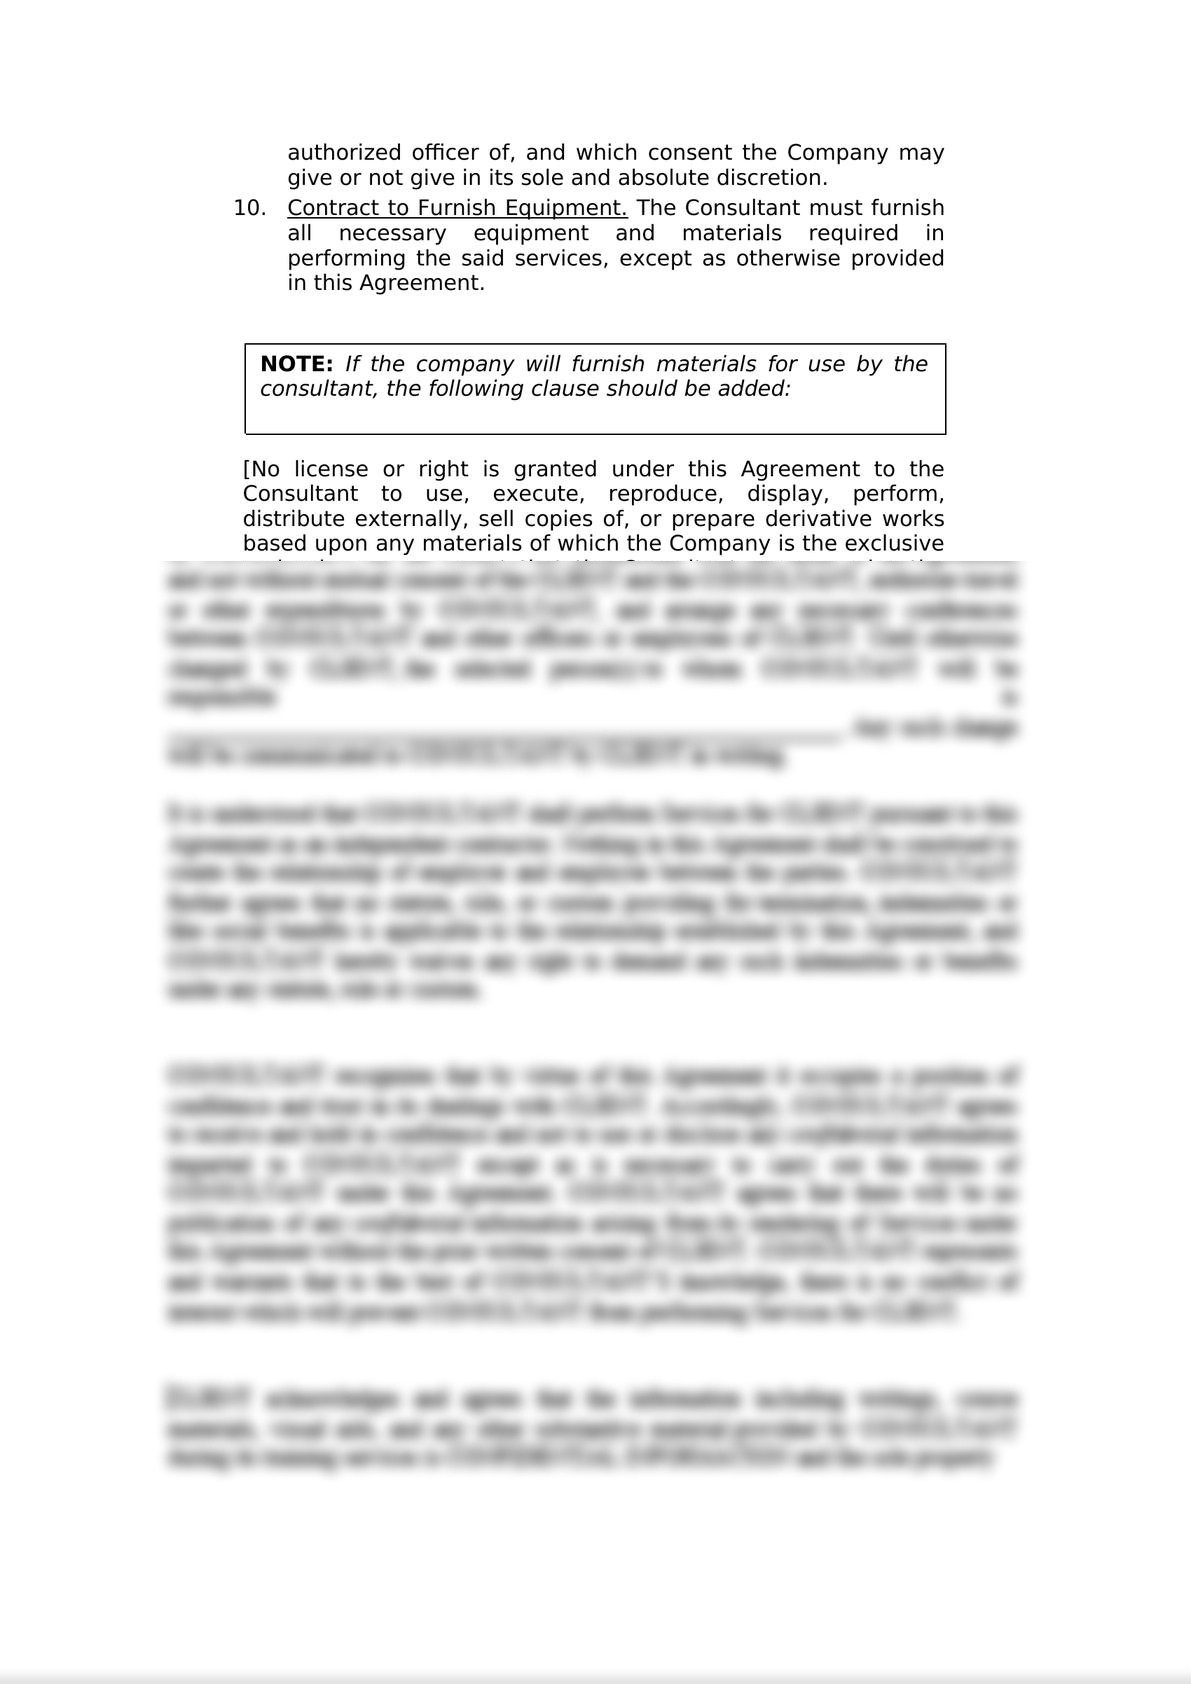 Consulting Agreement-4